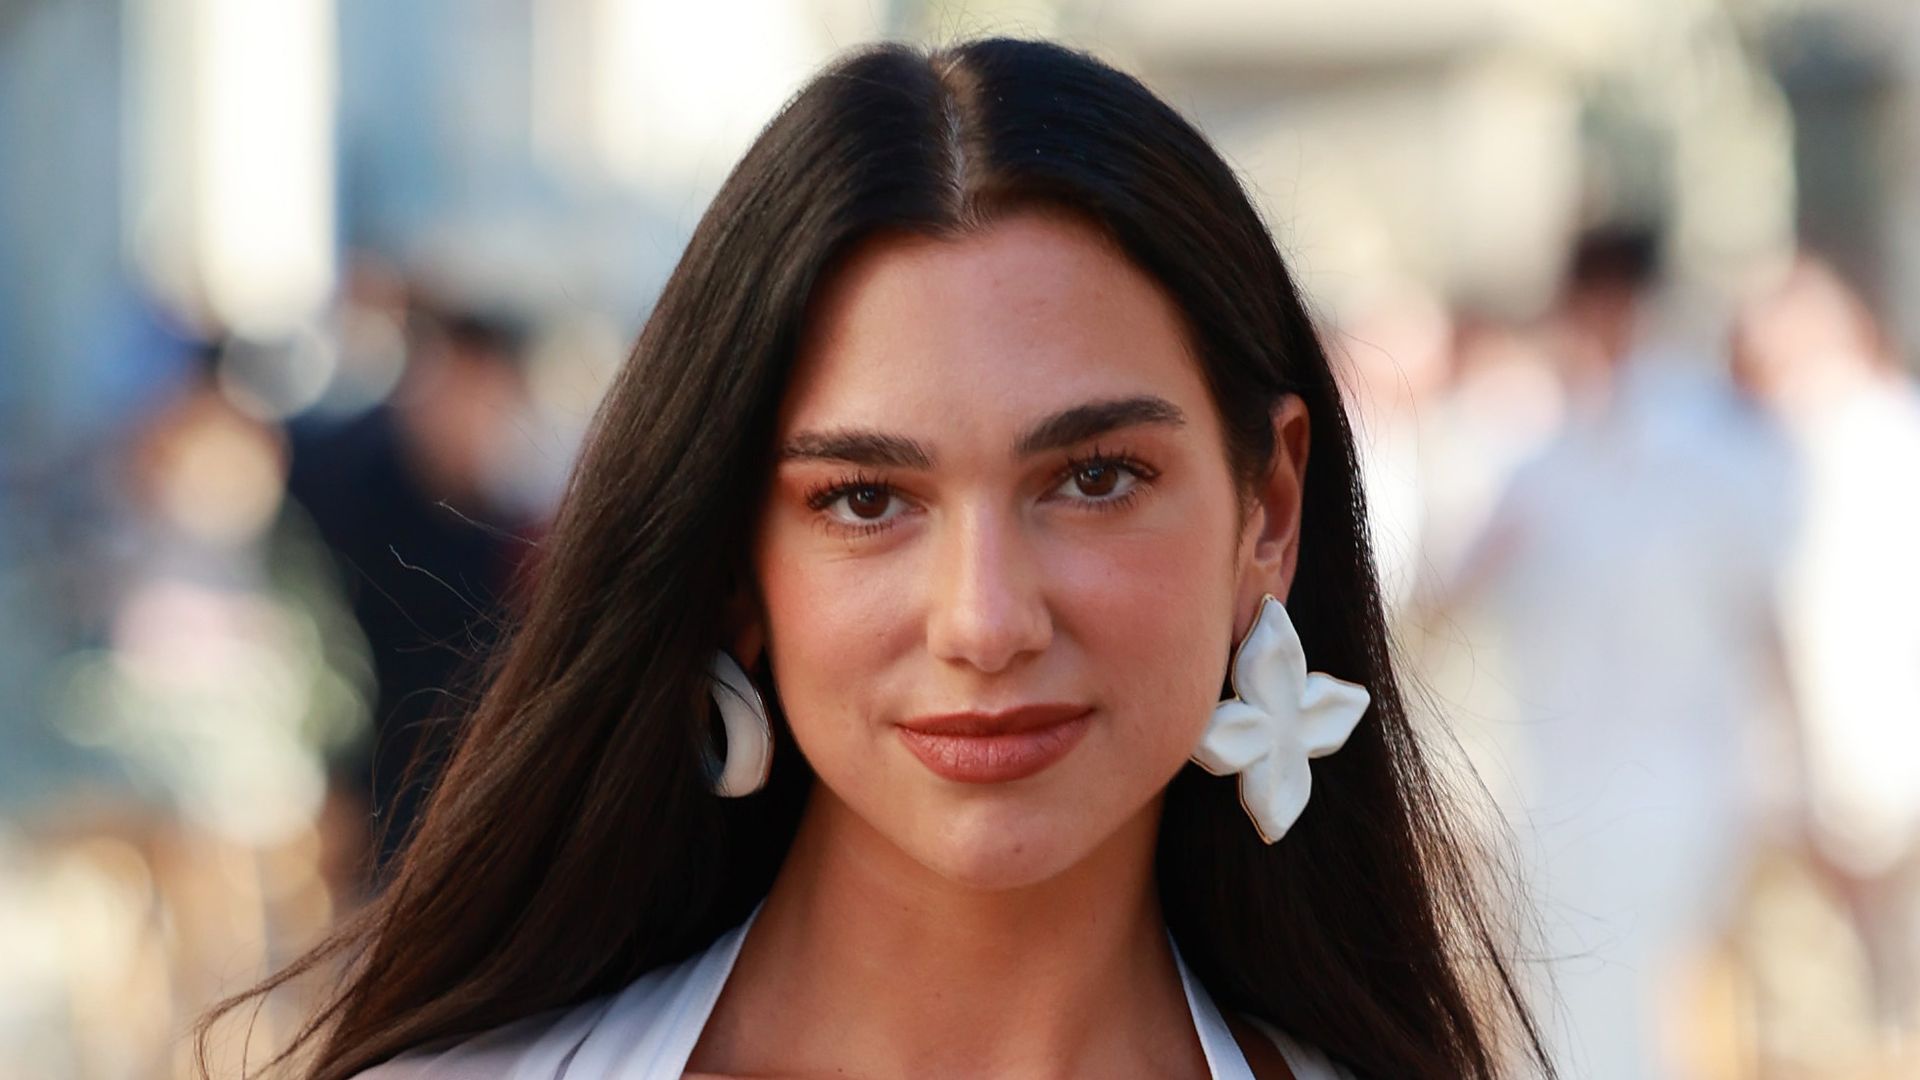 CHARLEVAL, FRANCE - AUGUST 27: Dua Lipa attends the wedding Of Simon Porte Jacquemus And  Marco Maestri on August 27, 2022 in Charleval, France. (Photo by Arnold Jerocki/Getty Images)